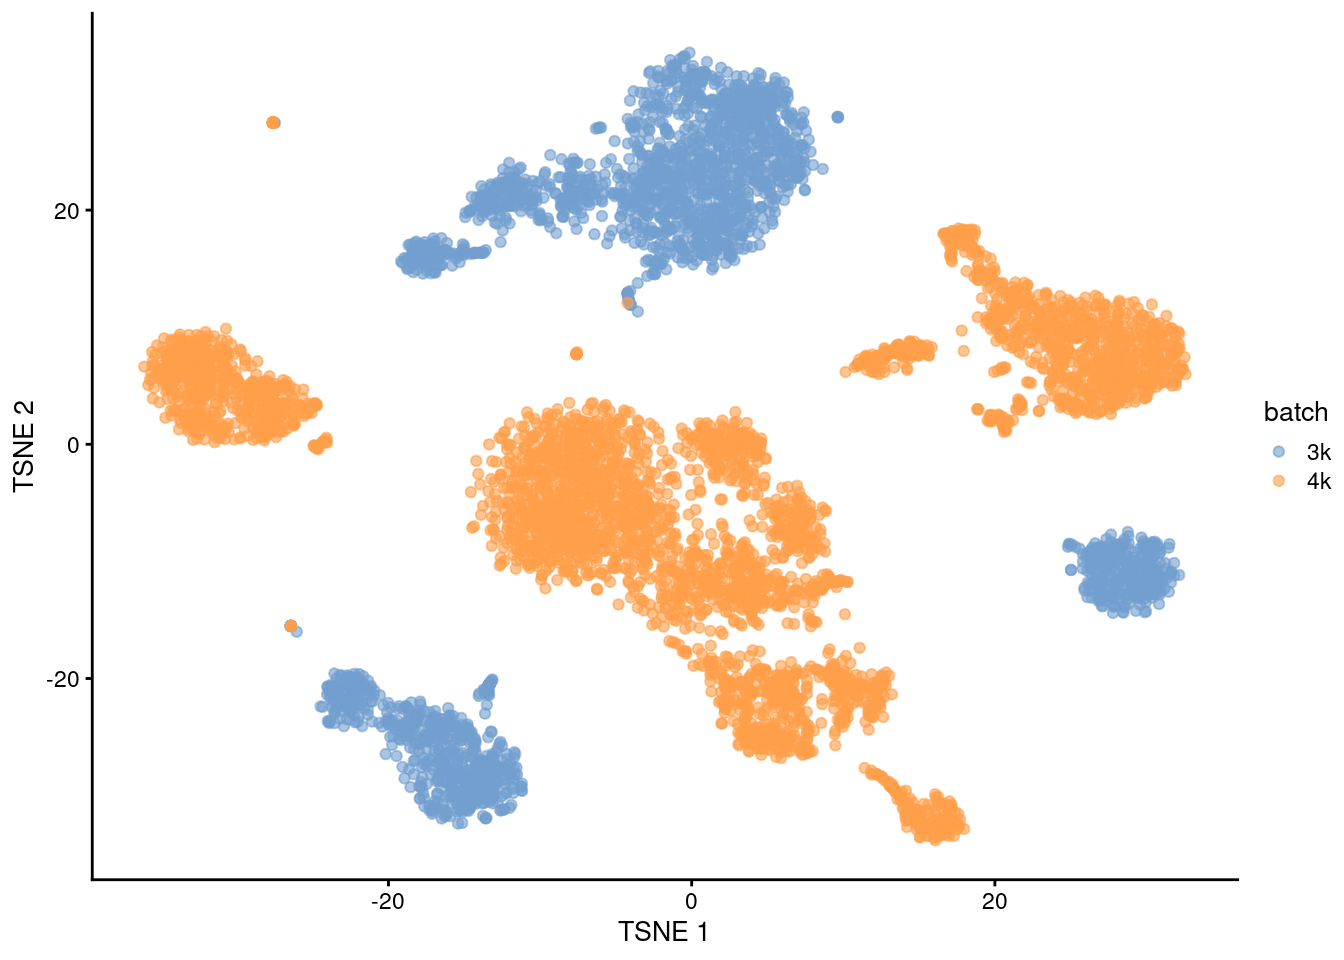 $t$-SNE plot of the PBMC datasets without any batch correction. Each point is a cell that is colored according to its batch of origin.